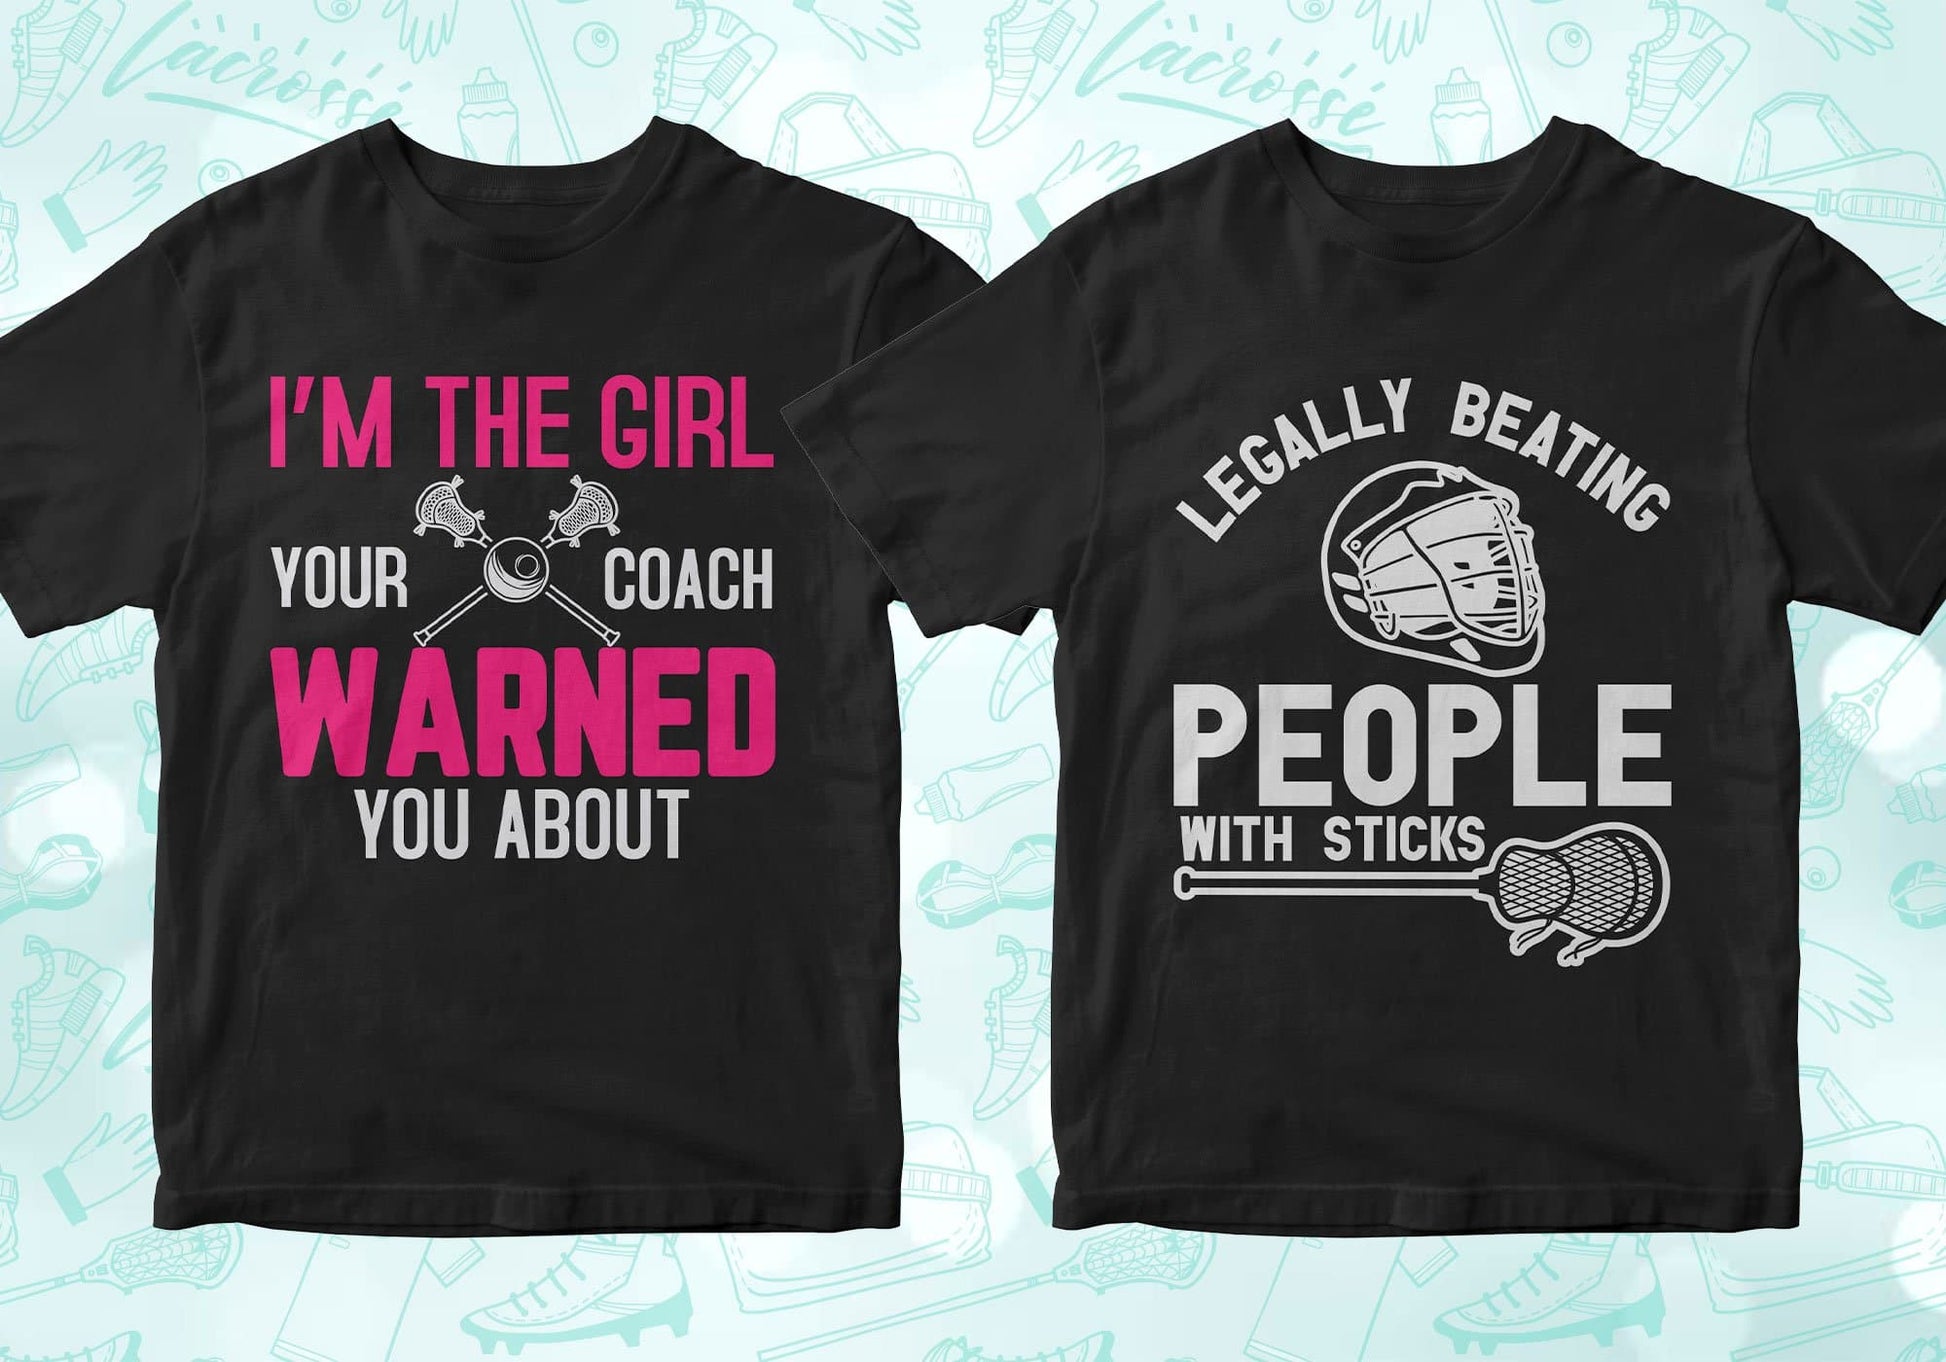 i'm the girl your coach warned you about, legally beating people with sticks, lacrosse shirts lacrosse tshirt lacrosse t shirts lacrosse shirt designs lacrosse graphic